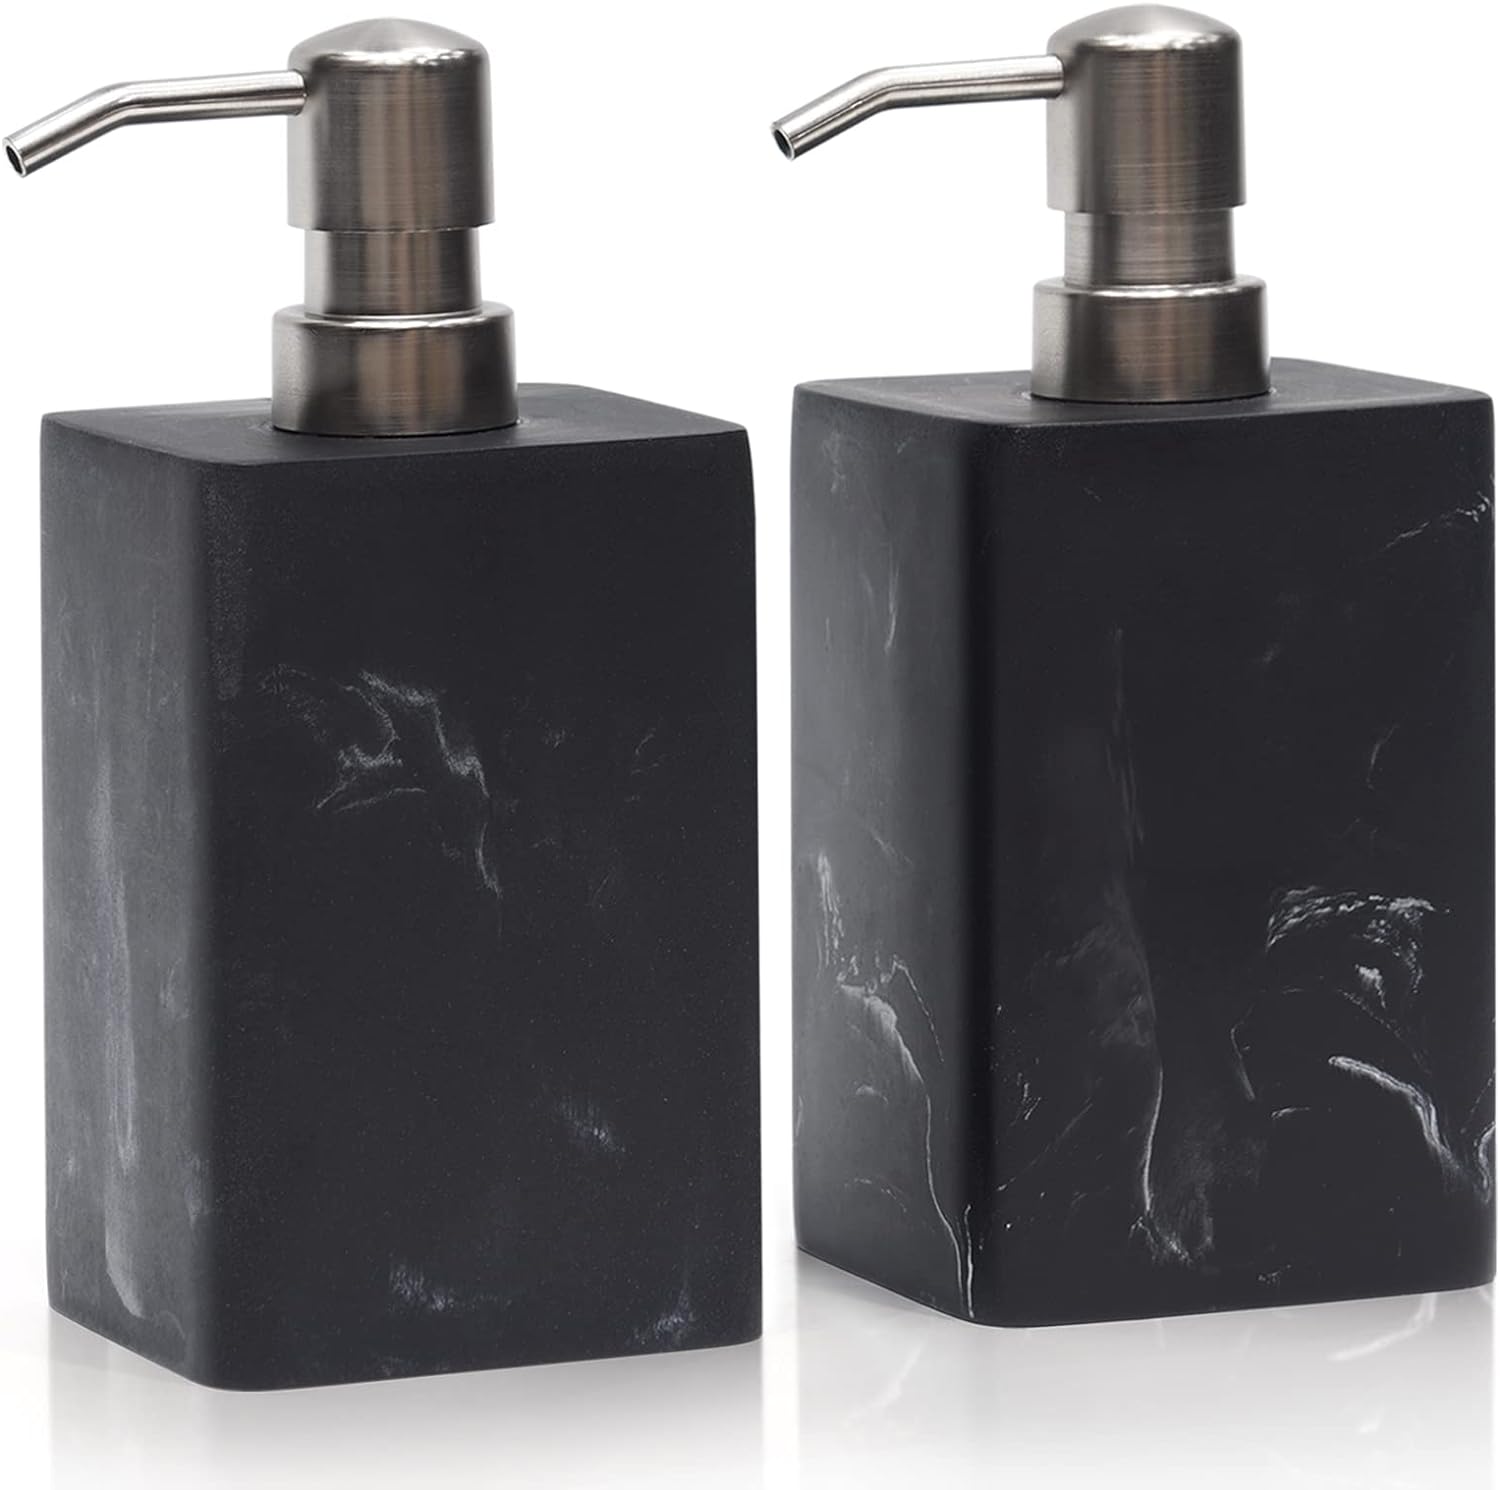 15 Oz (about 425.2G) Marble Style Resin Soap Dispenser Set, 2 Pieces Suanti Hand Sanitizer and Lotion Dispenser, Suitable for Bathroom Countertop and Kitchen Sink Decoration, Refillable Liquid Dish Soap Dispenser with Easy Pressure Pump-Black